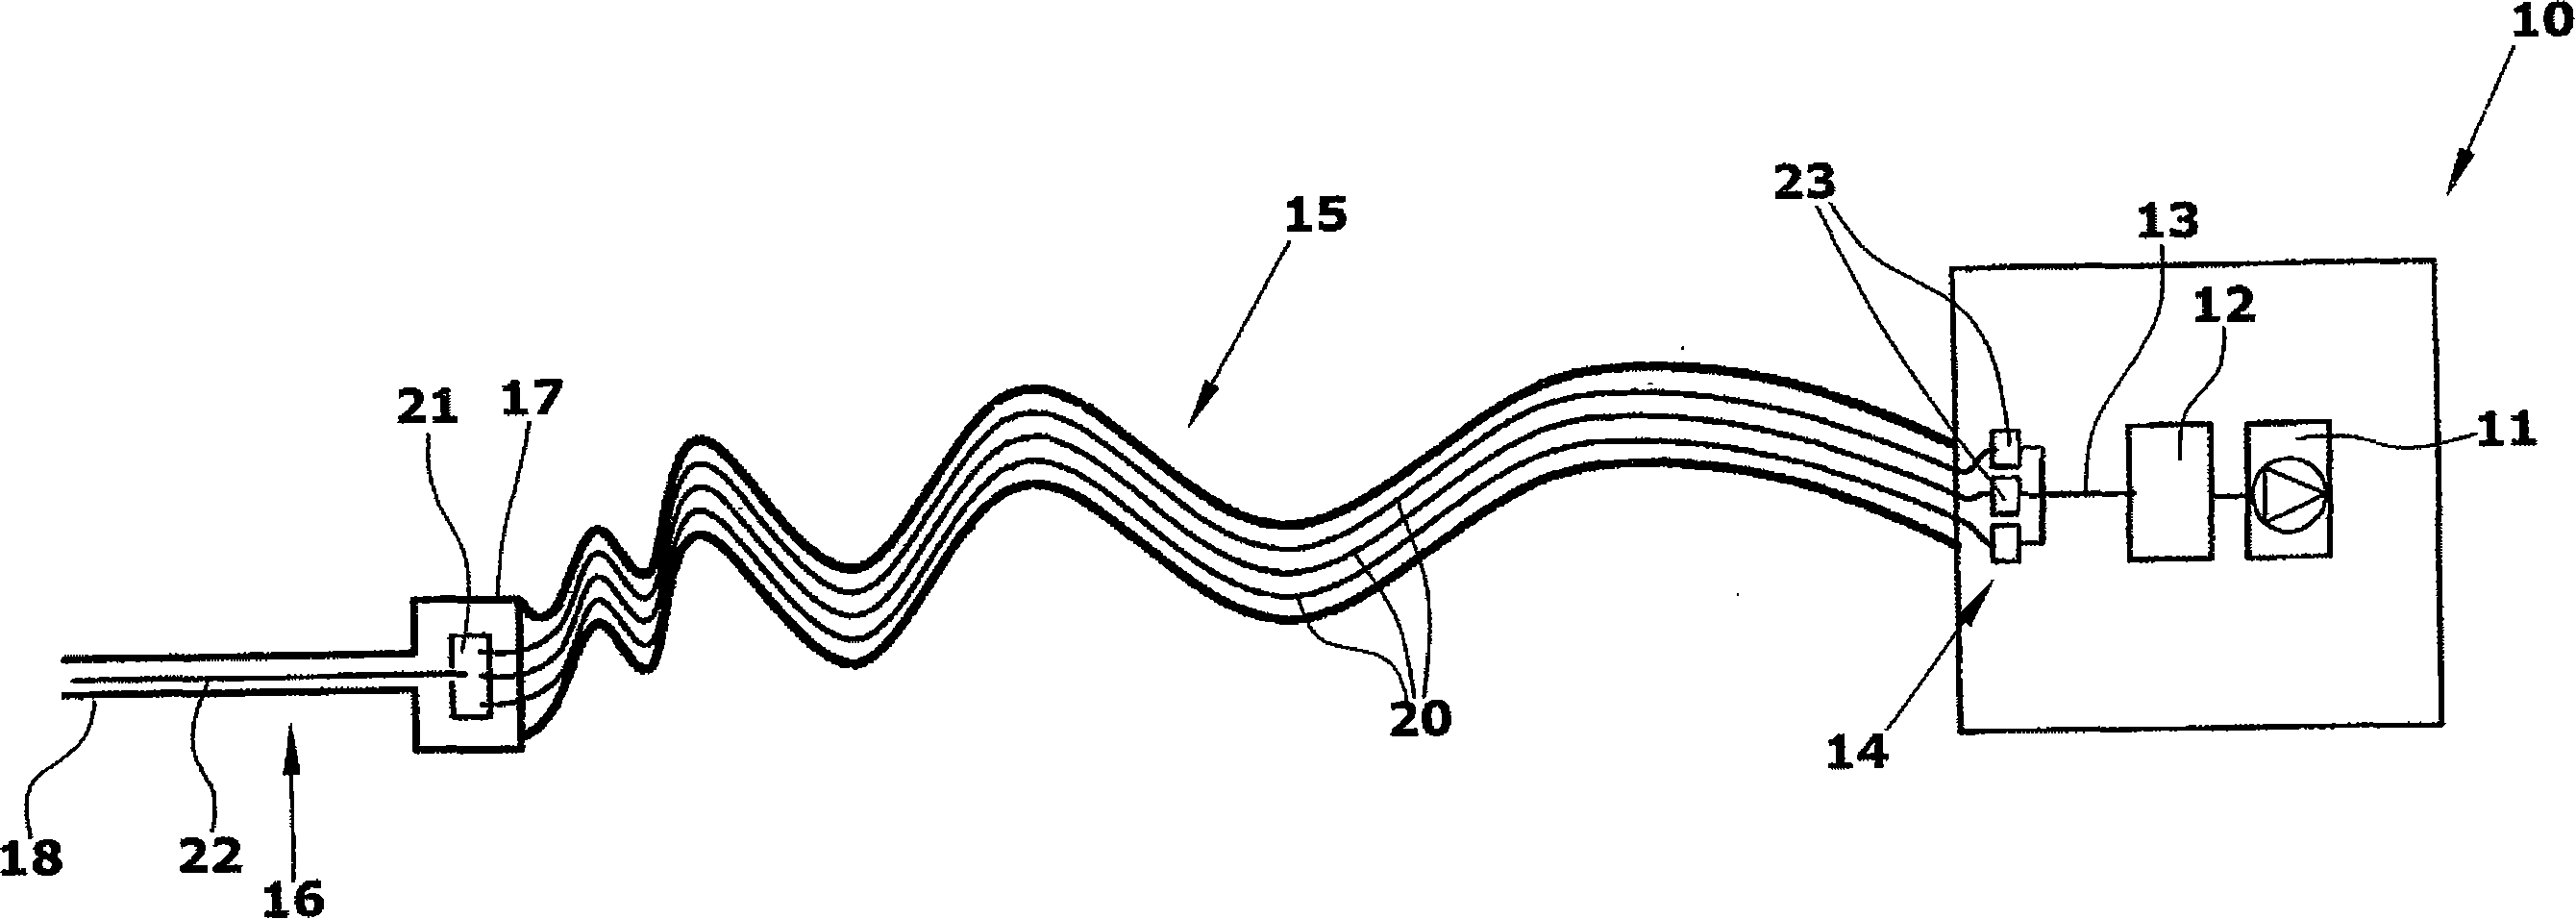 Leak indicator comprising a sniffer probe